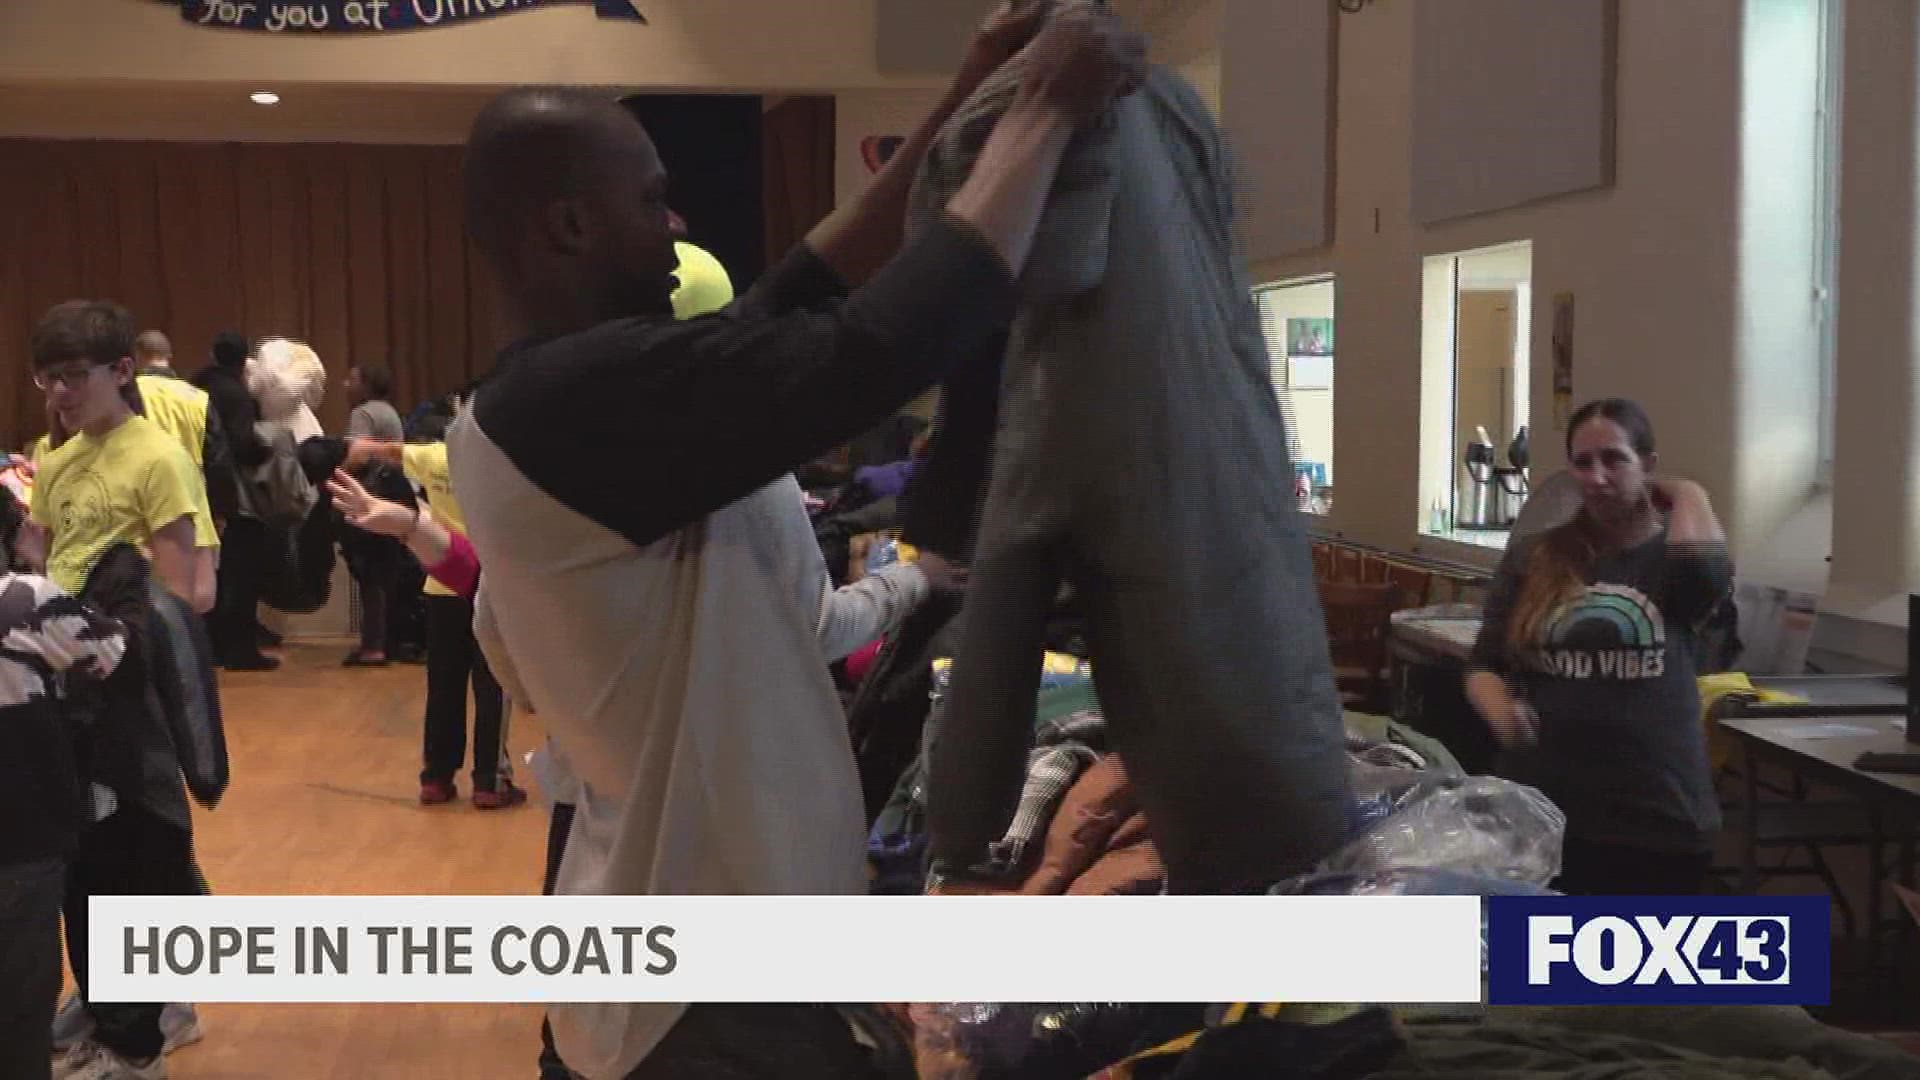 A non-profit in York is giving the gift of warmth this winter. Volunteers collected and handed out hundreds of coats Saturday afternoon.